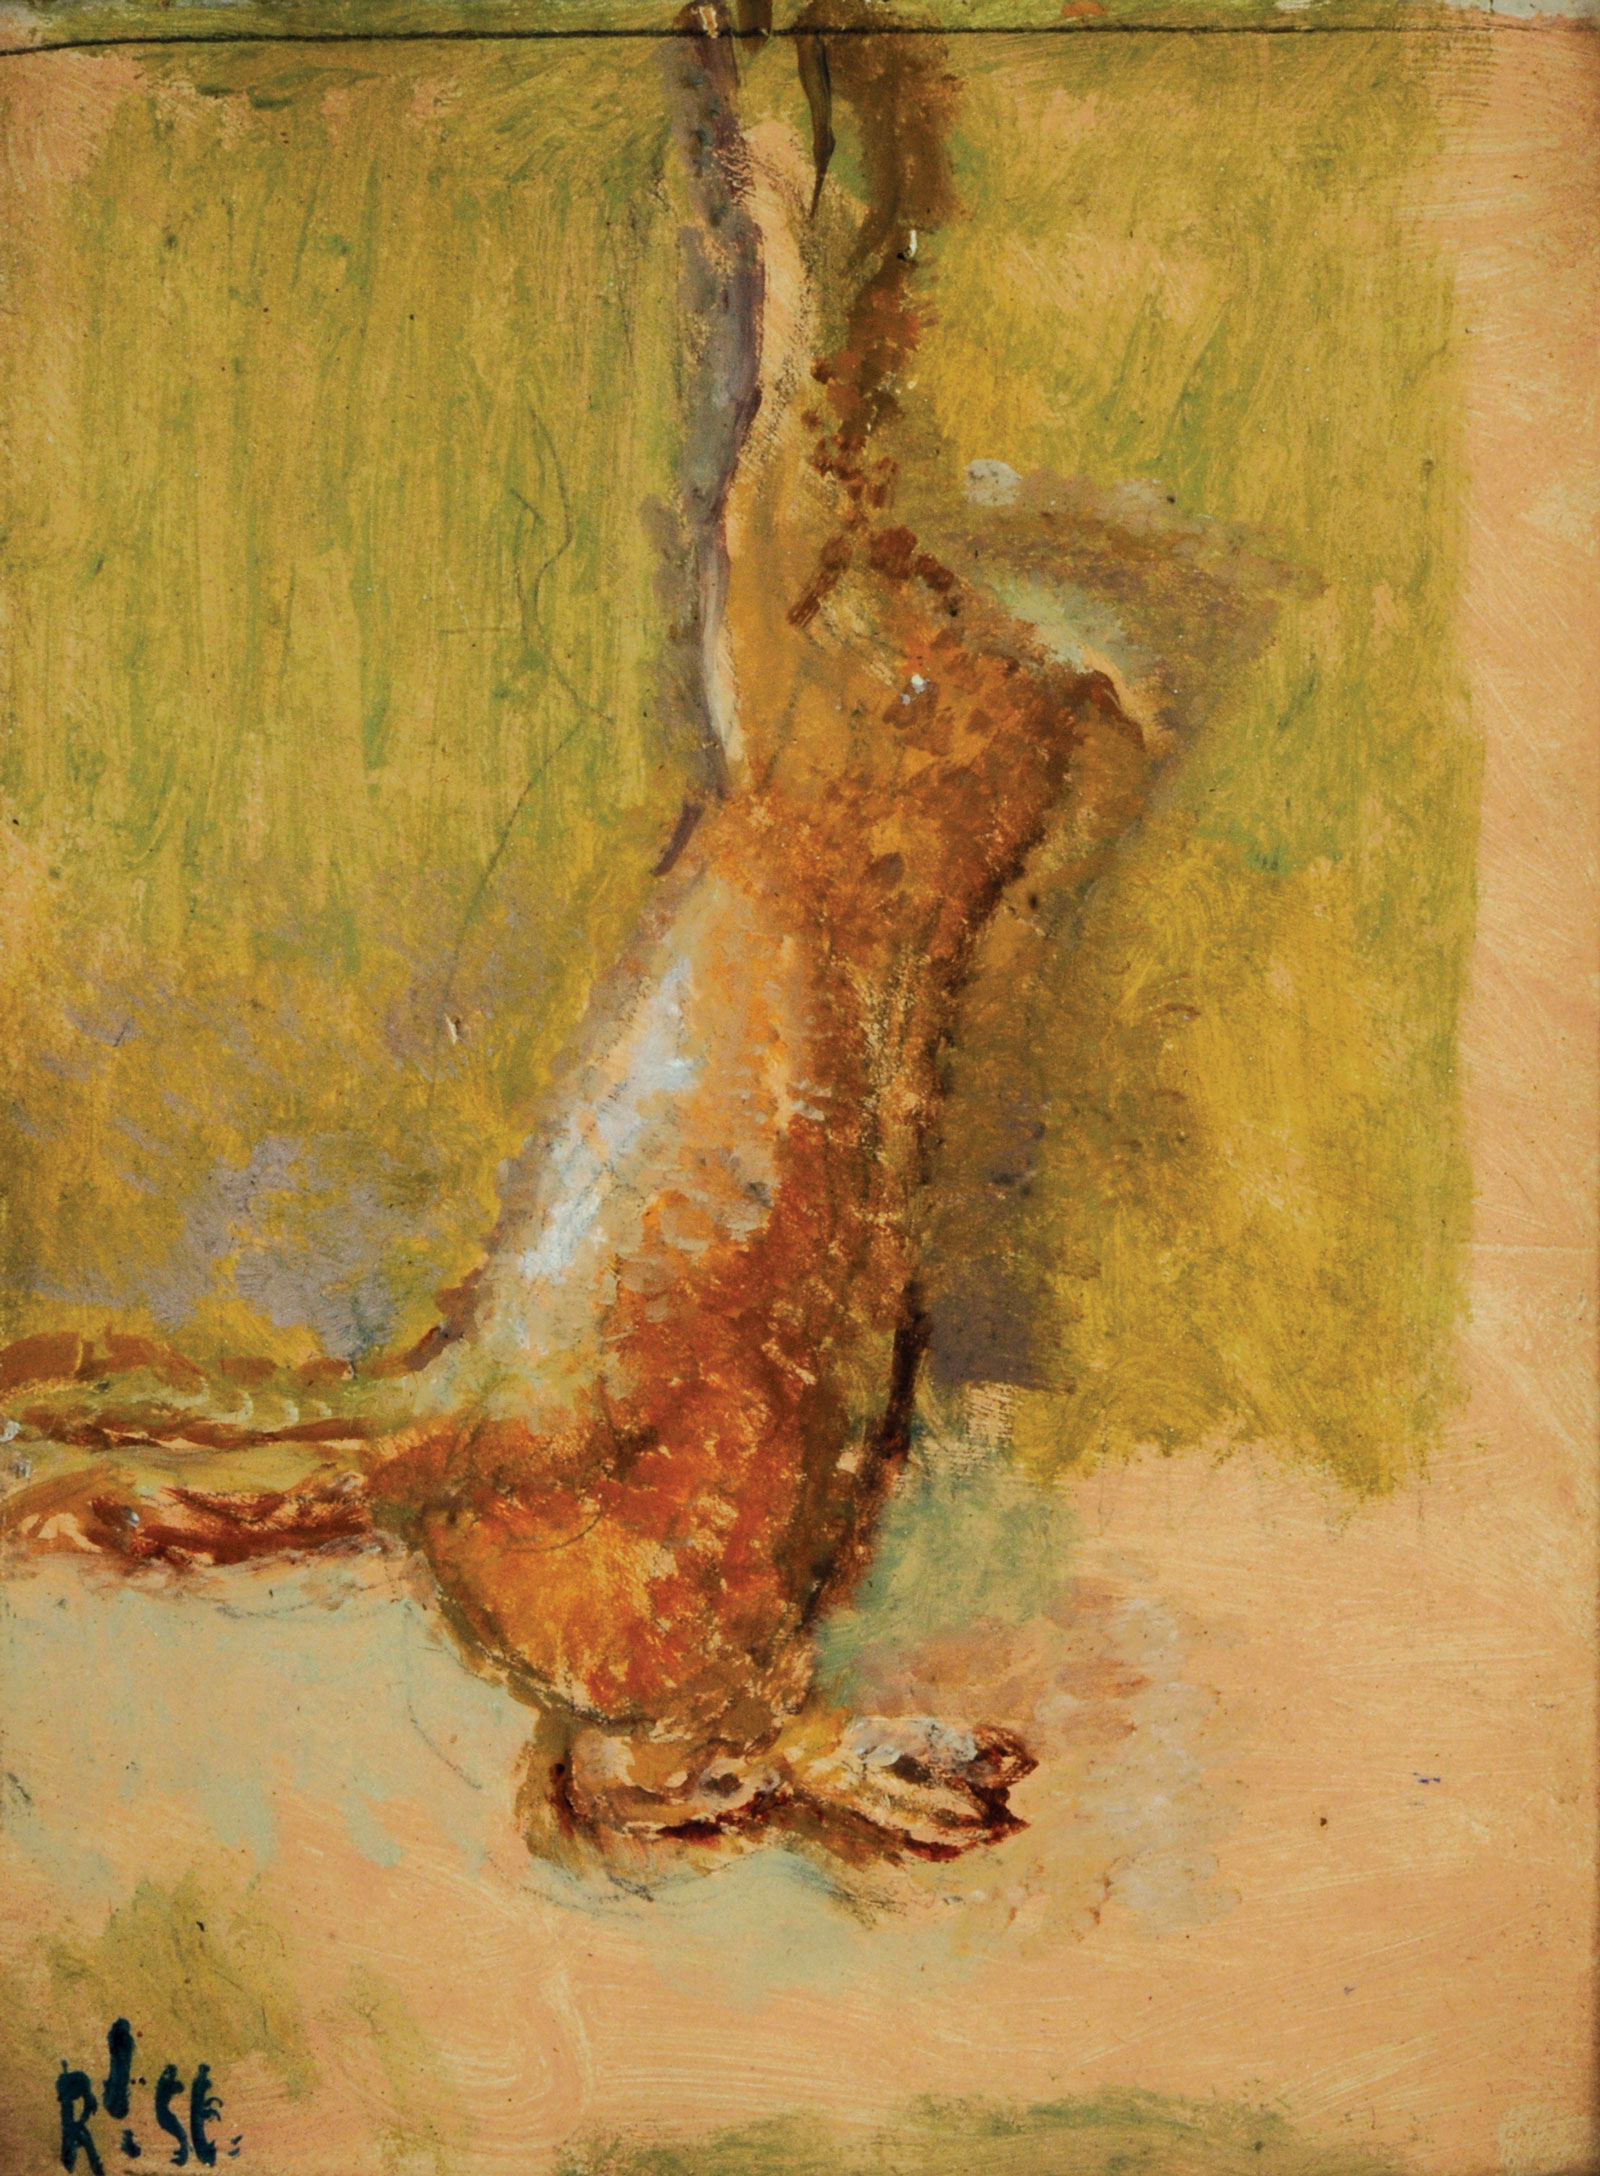 The undated painting “Dead Hare” by Walter Sickert, depicting an impressionist representation of a dead hare hung by its legs.